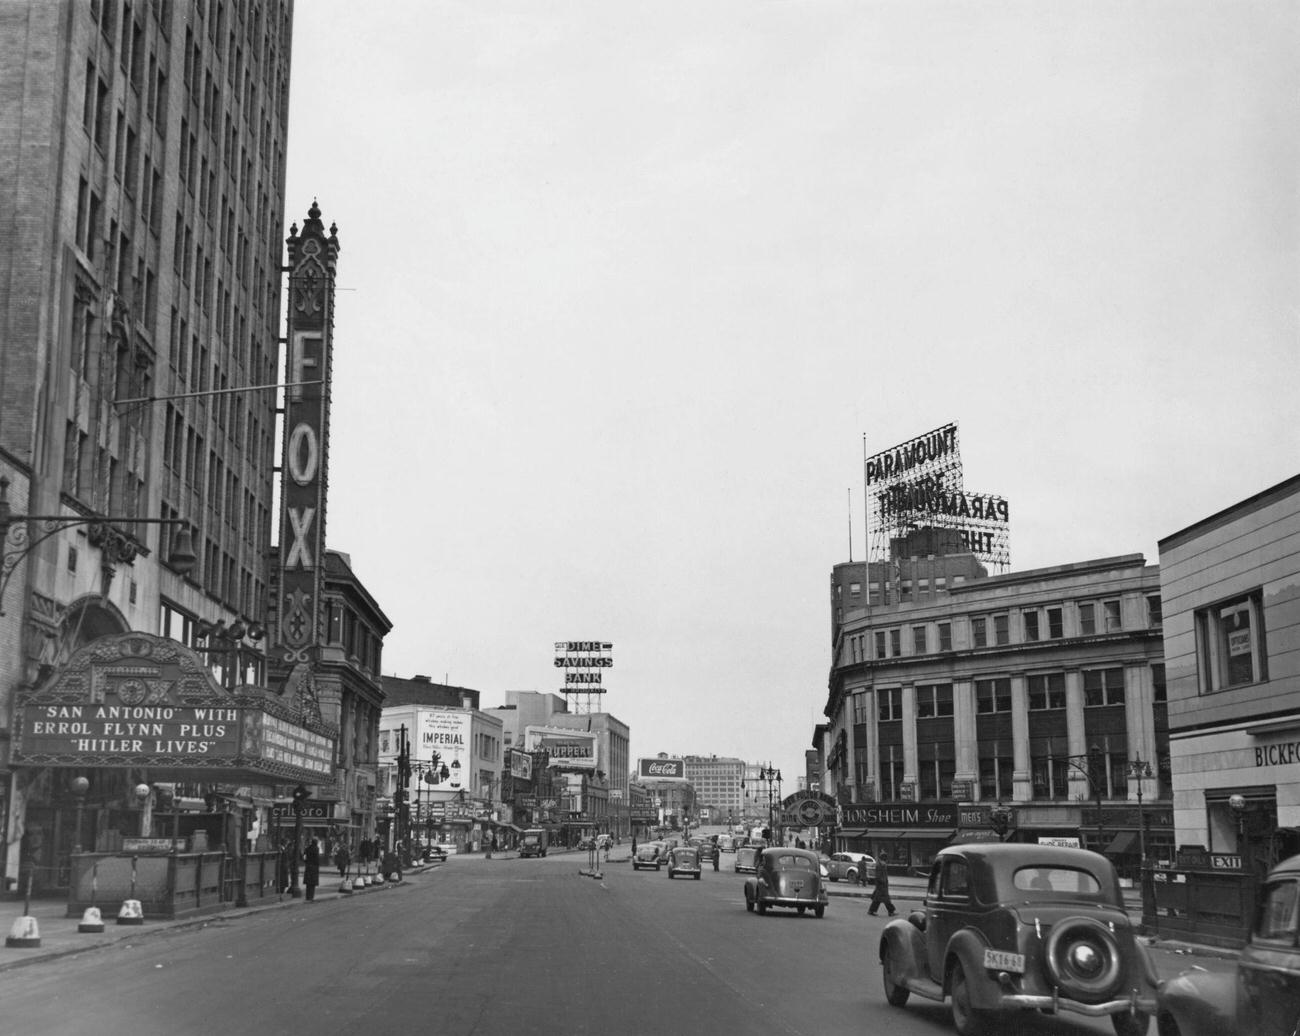 A View Down Flatbush Avenue In Brooklyn, New York City, 1945. On The Right Is The Paramount Theatre, And On The Left Is The Fox Theatre, Showing 'San Antonio', With Errol Flynn, And Don Siegel'S 'Hitler Lives'.